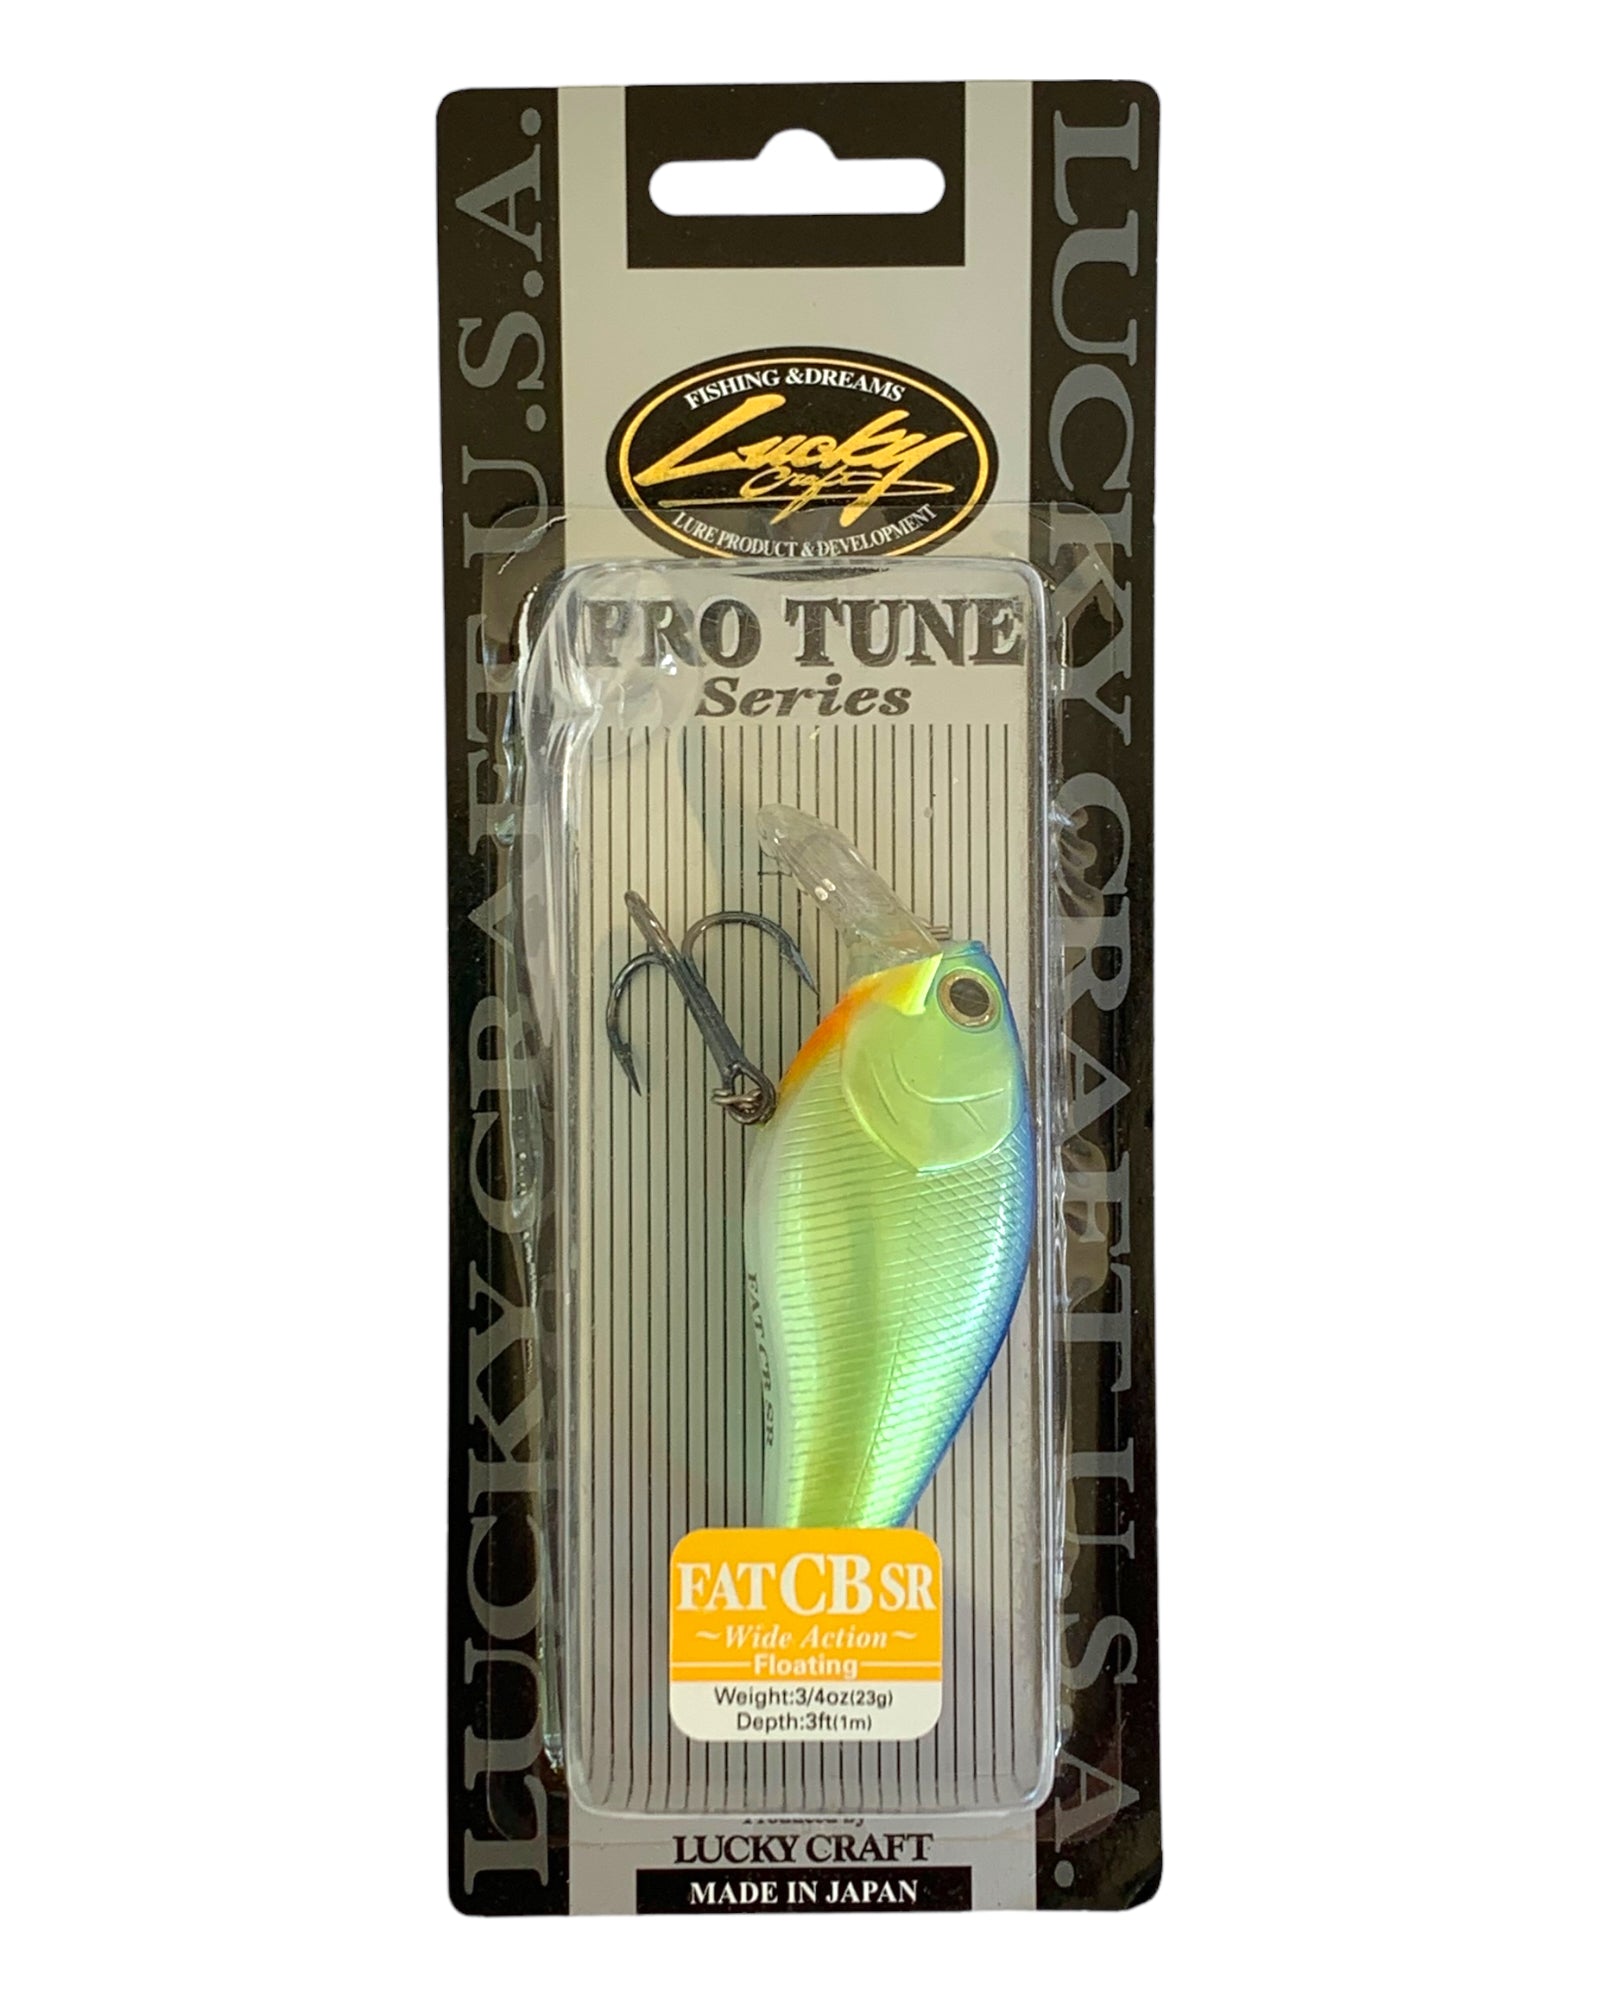 LUCKY CRAFT FAT CB SR Fishing Crankbait in Chartreuse Blue – Toad Tackle